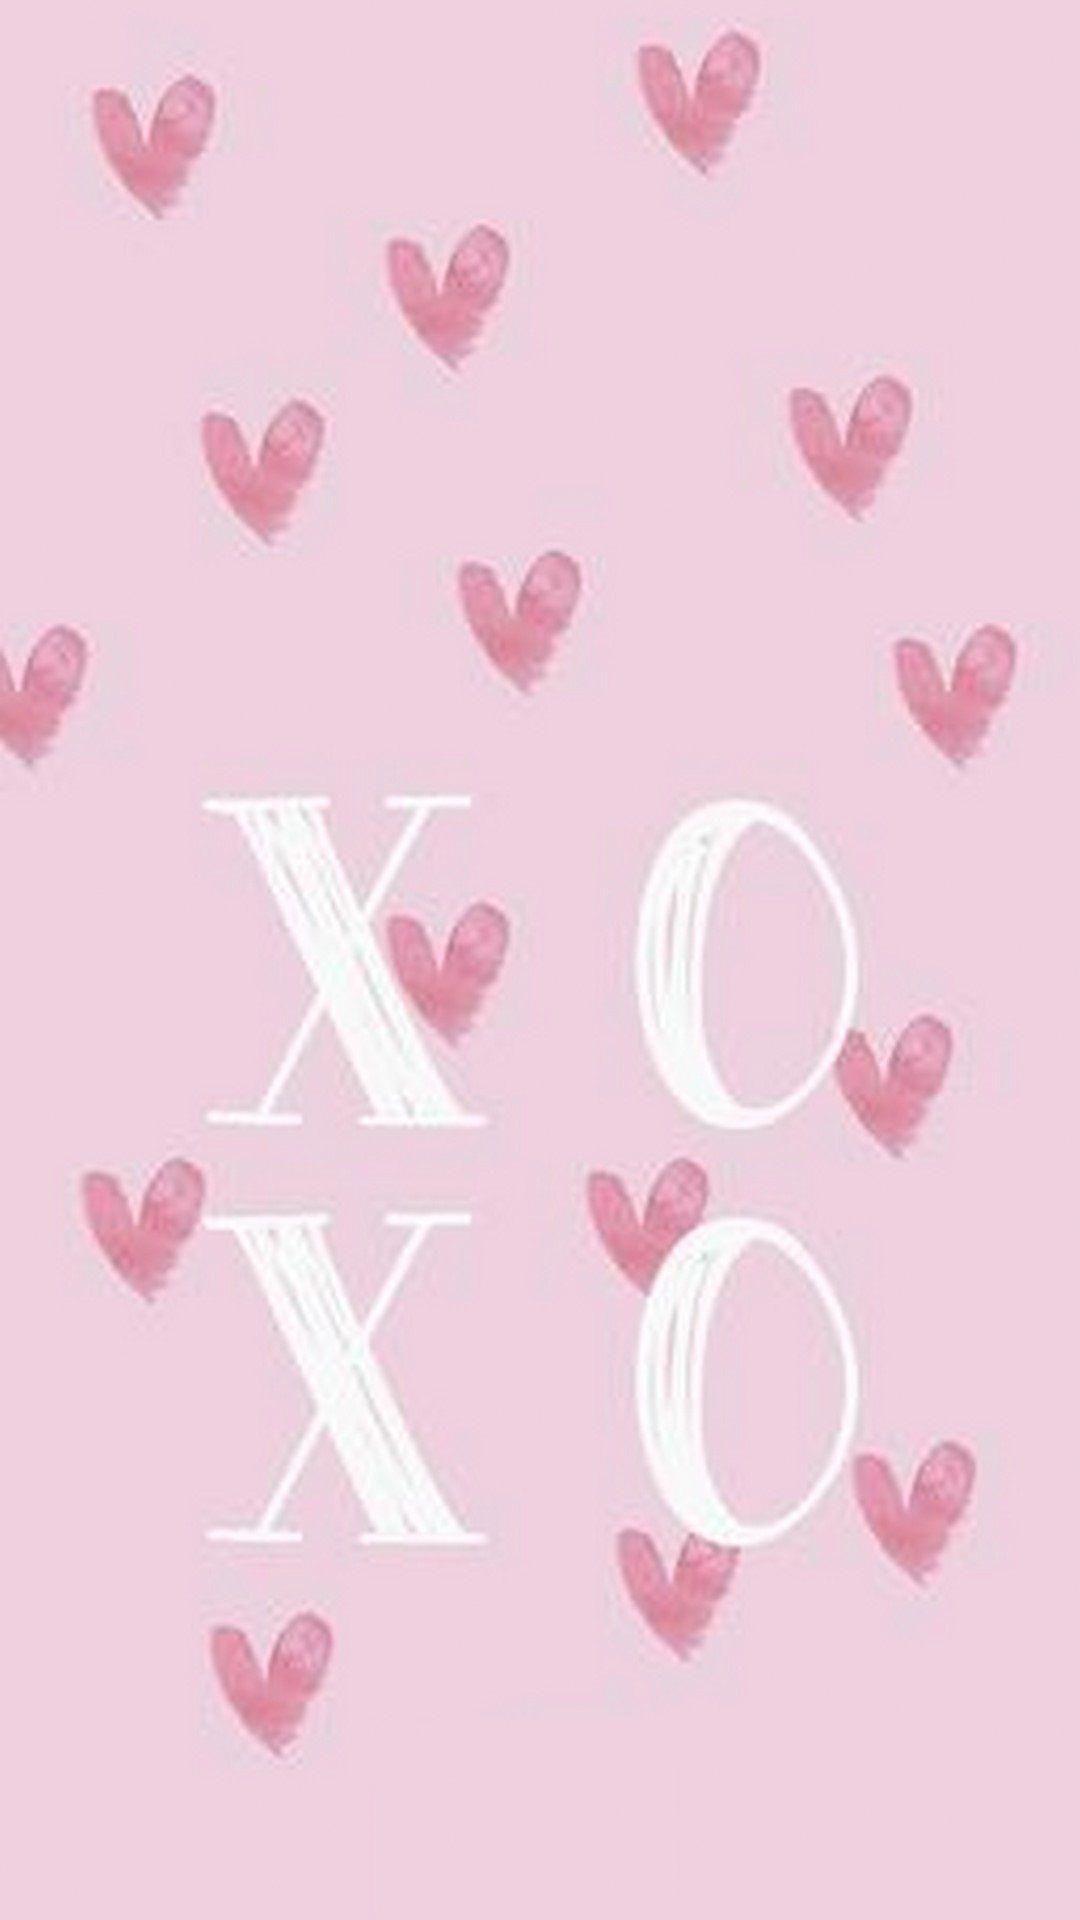 65 Cute Valentines Day Wallpapers For iPhone Free Download  Valentines  wallpaper iphone Heart iphone wallpaper Valentines wallpaper